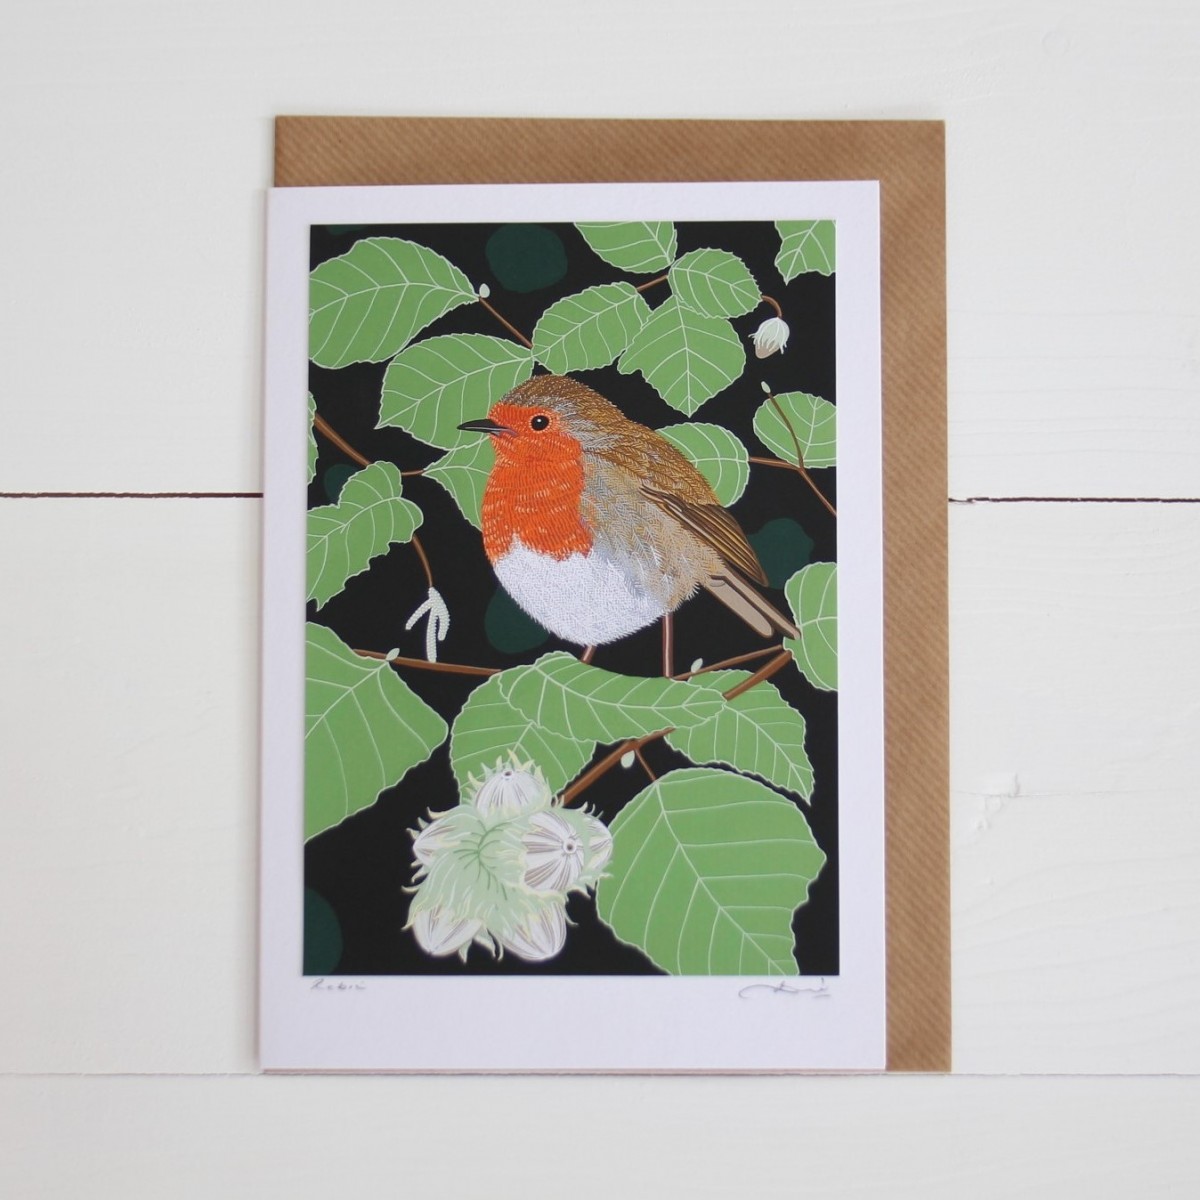 Robin Bird Flower Handmade Hand Titled And Signed Greeting Card A5